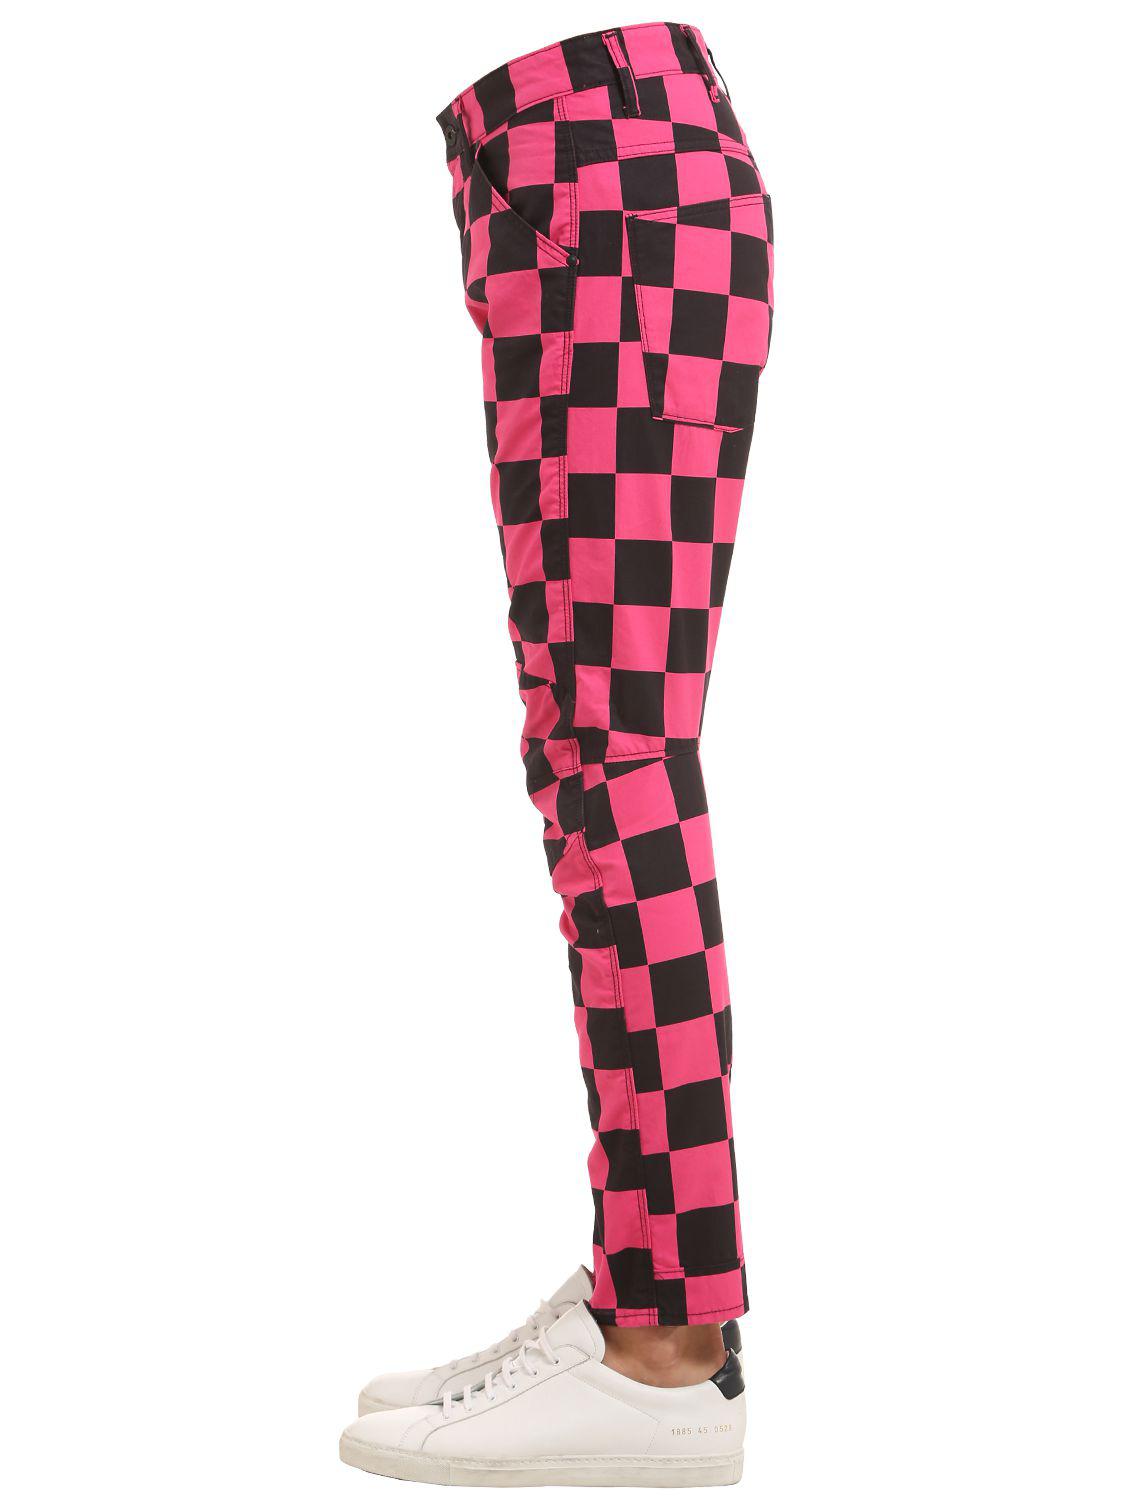 G-Star RAW Denim Elwood Chef's Check Printed Jeans in Pink/Black 